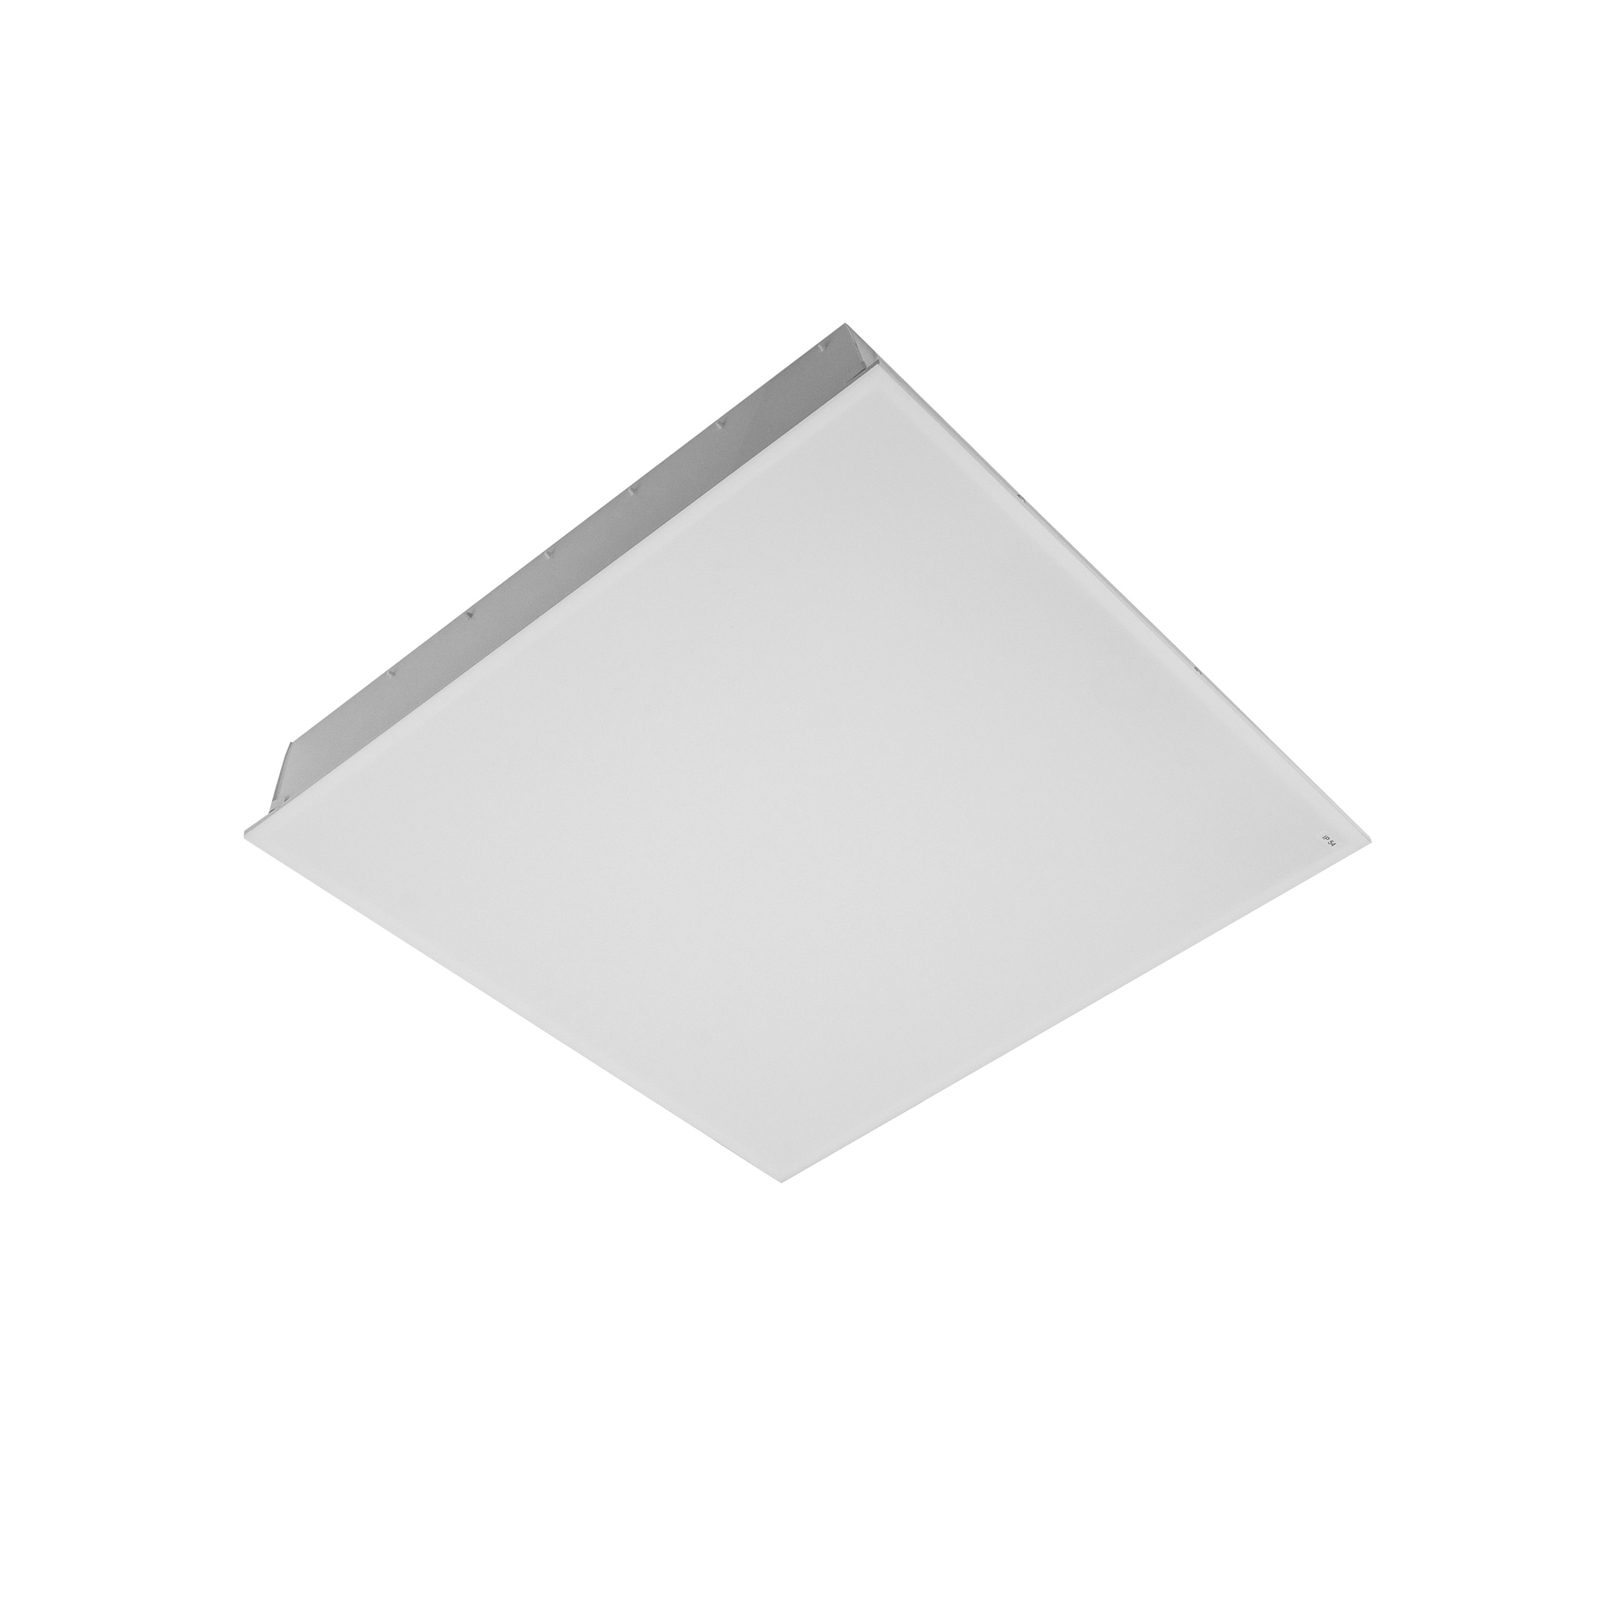 Recessed LED panel IBP4000 625 OP on/off 32W 840